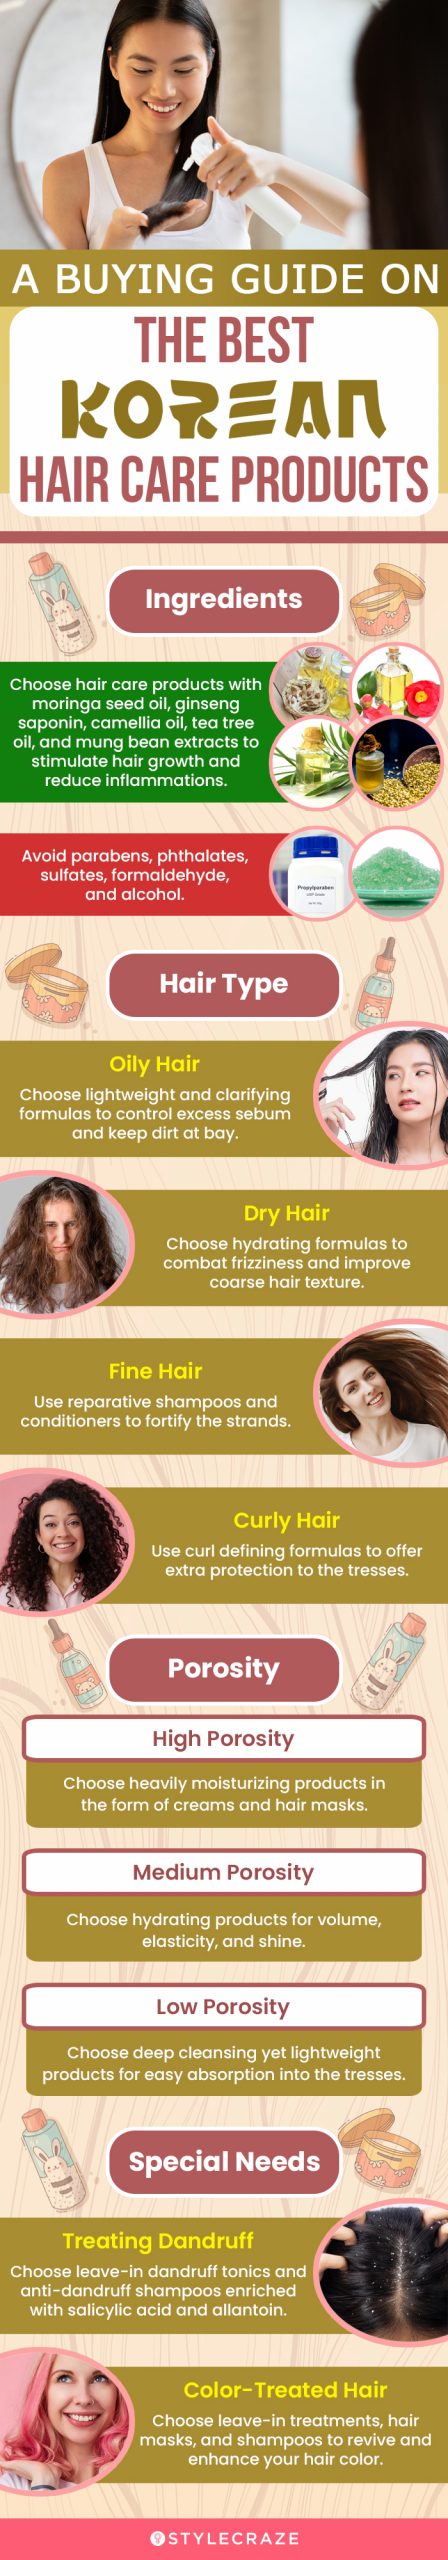 A Buying Guide On The Best Korean Hair Care Products (infographic)